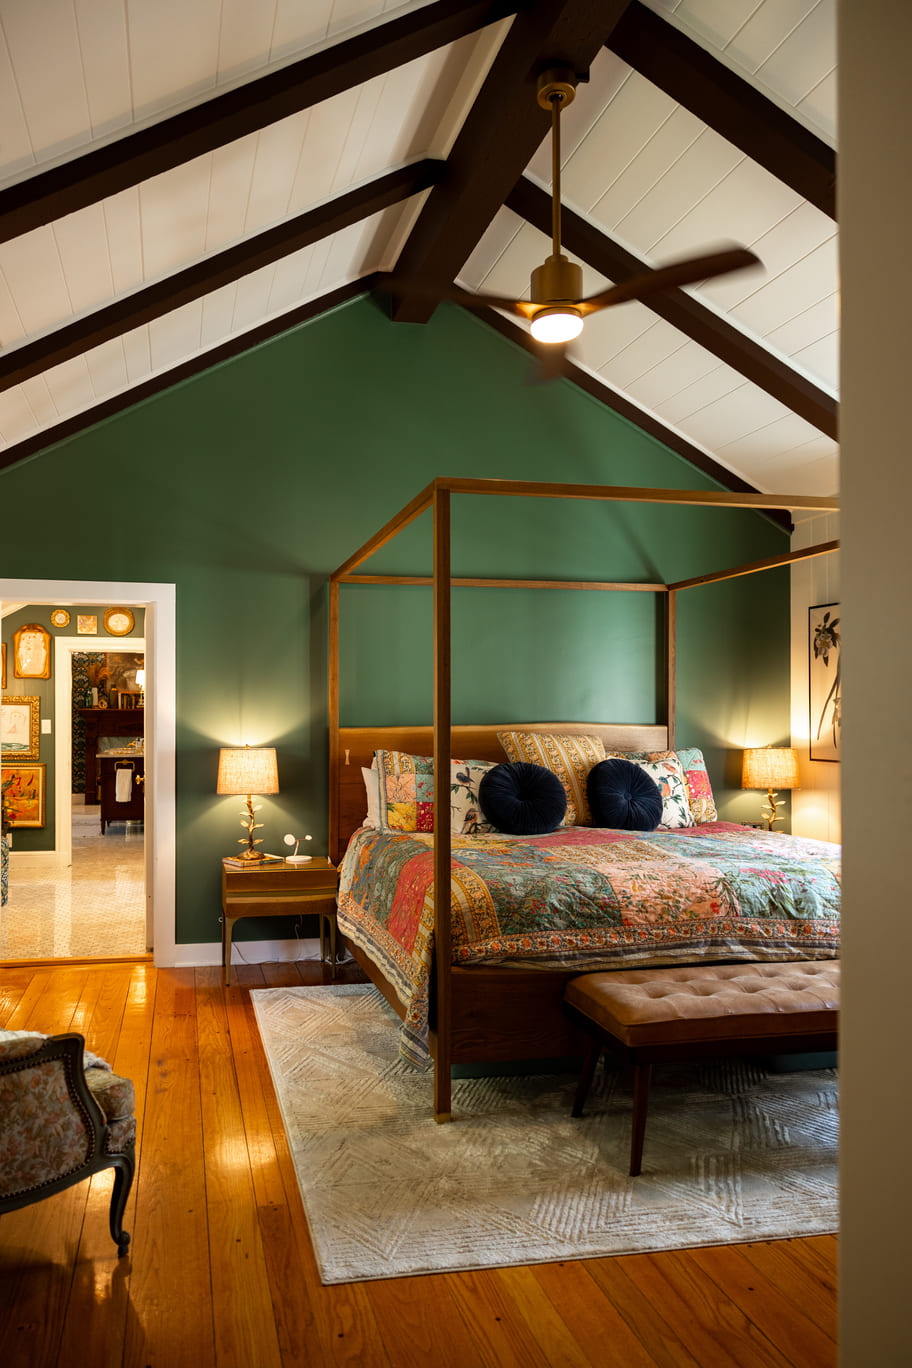 Bed with canopy bed frame in bedroom with vaulted ceilings, white and green walls, and wood floor